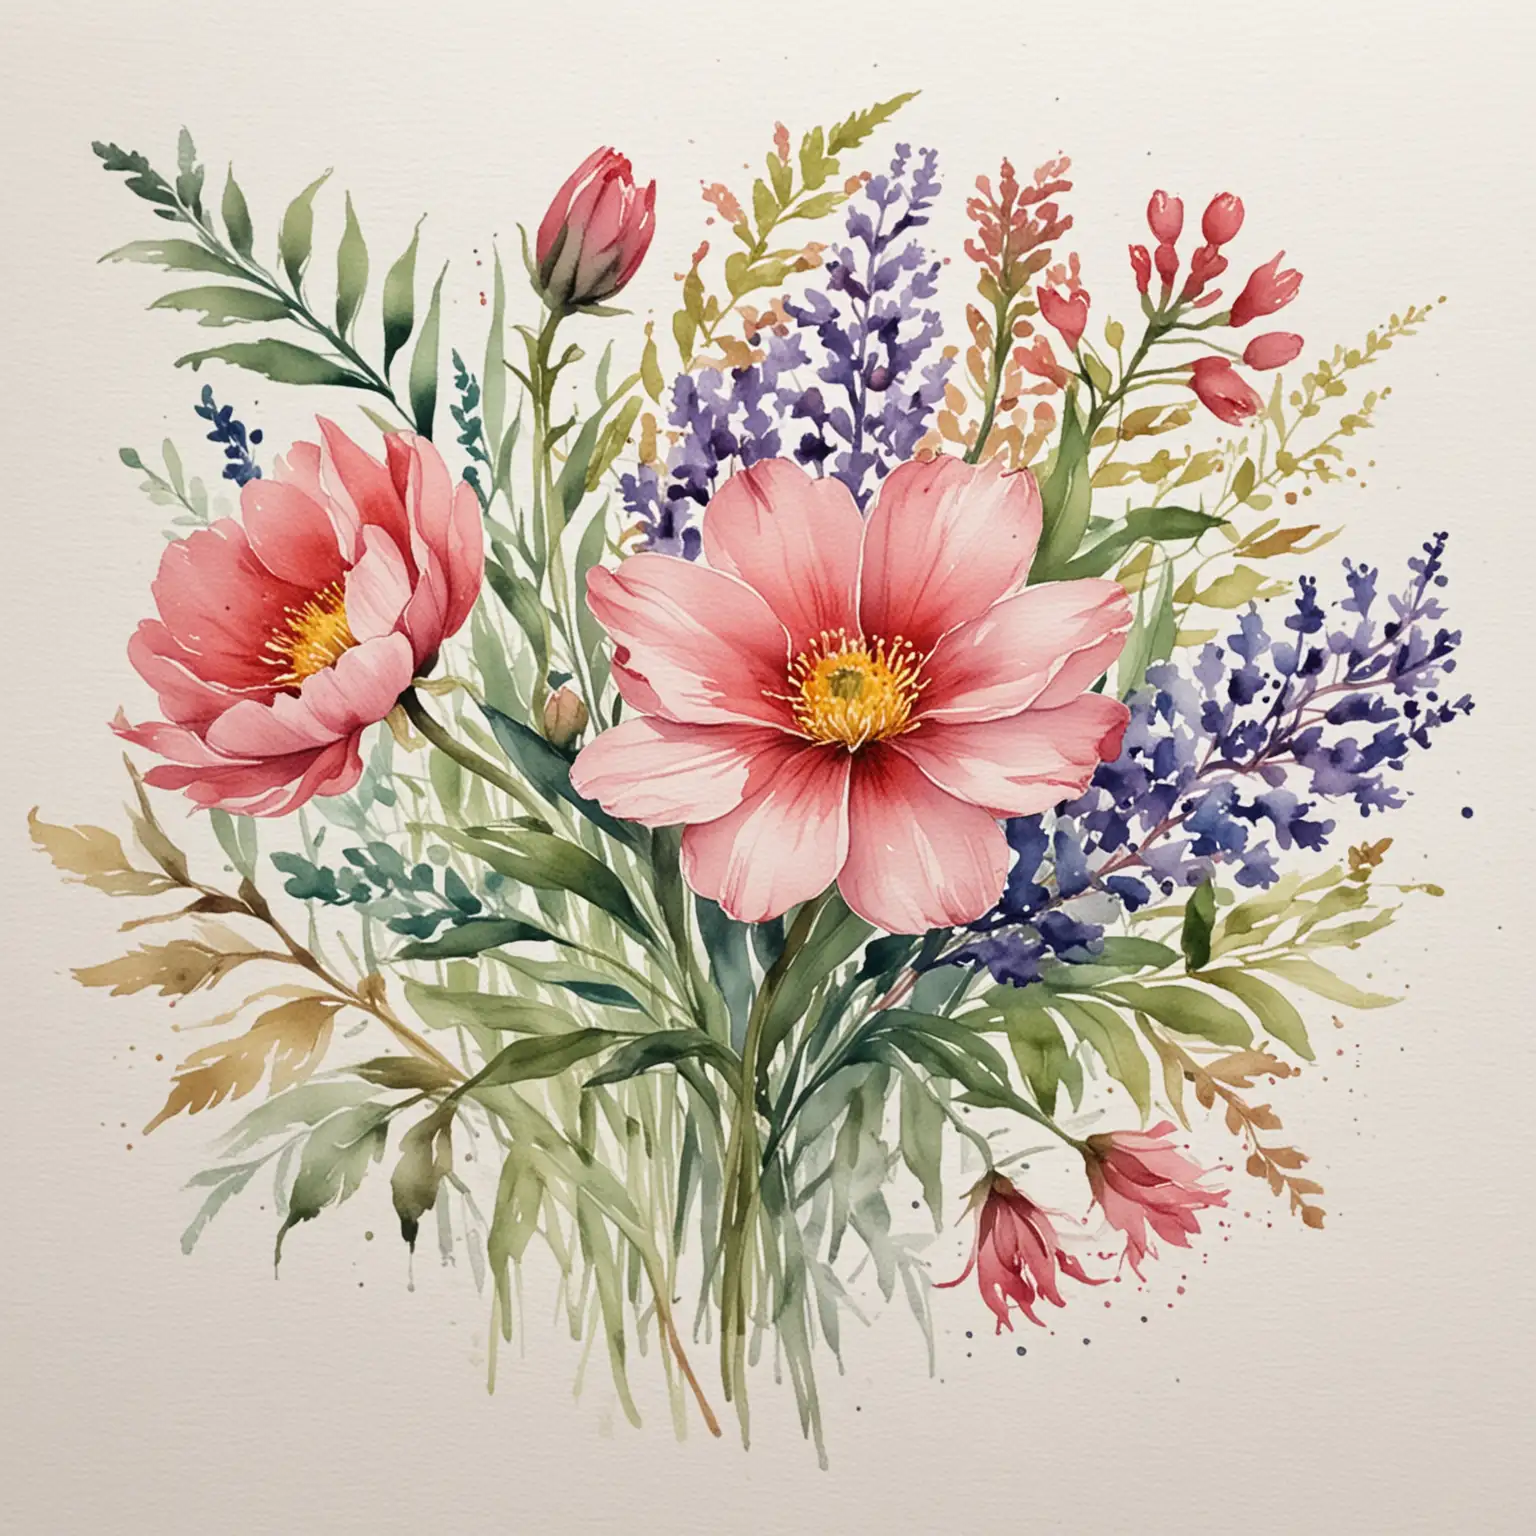 Vibrant Watercolor Painting of Delicate Flowers in Full Bloom